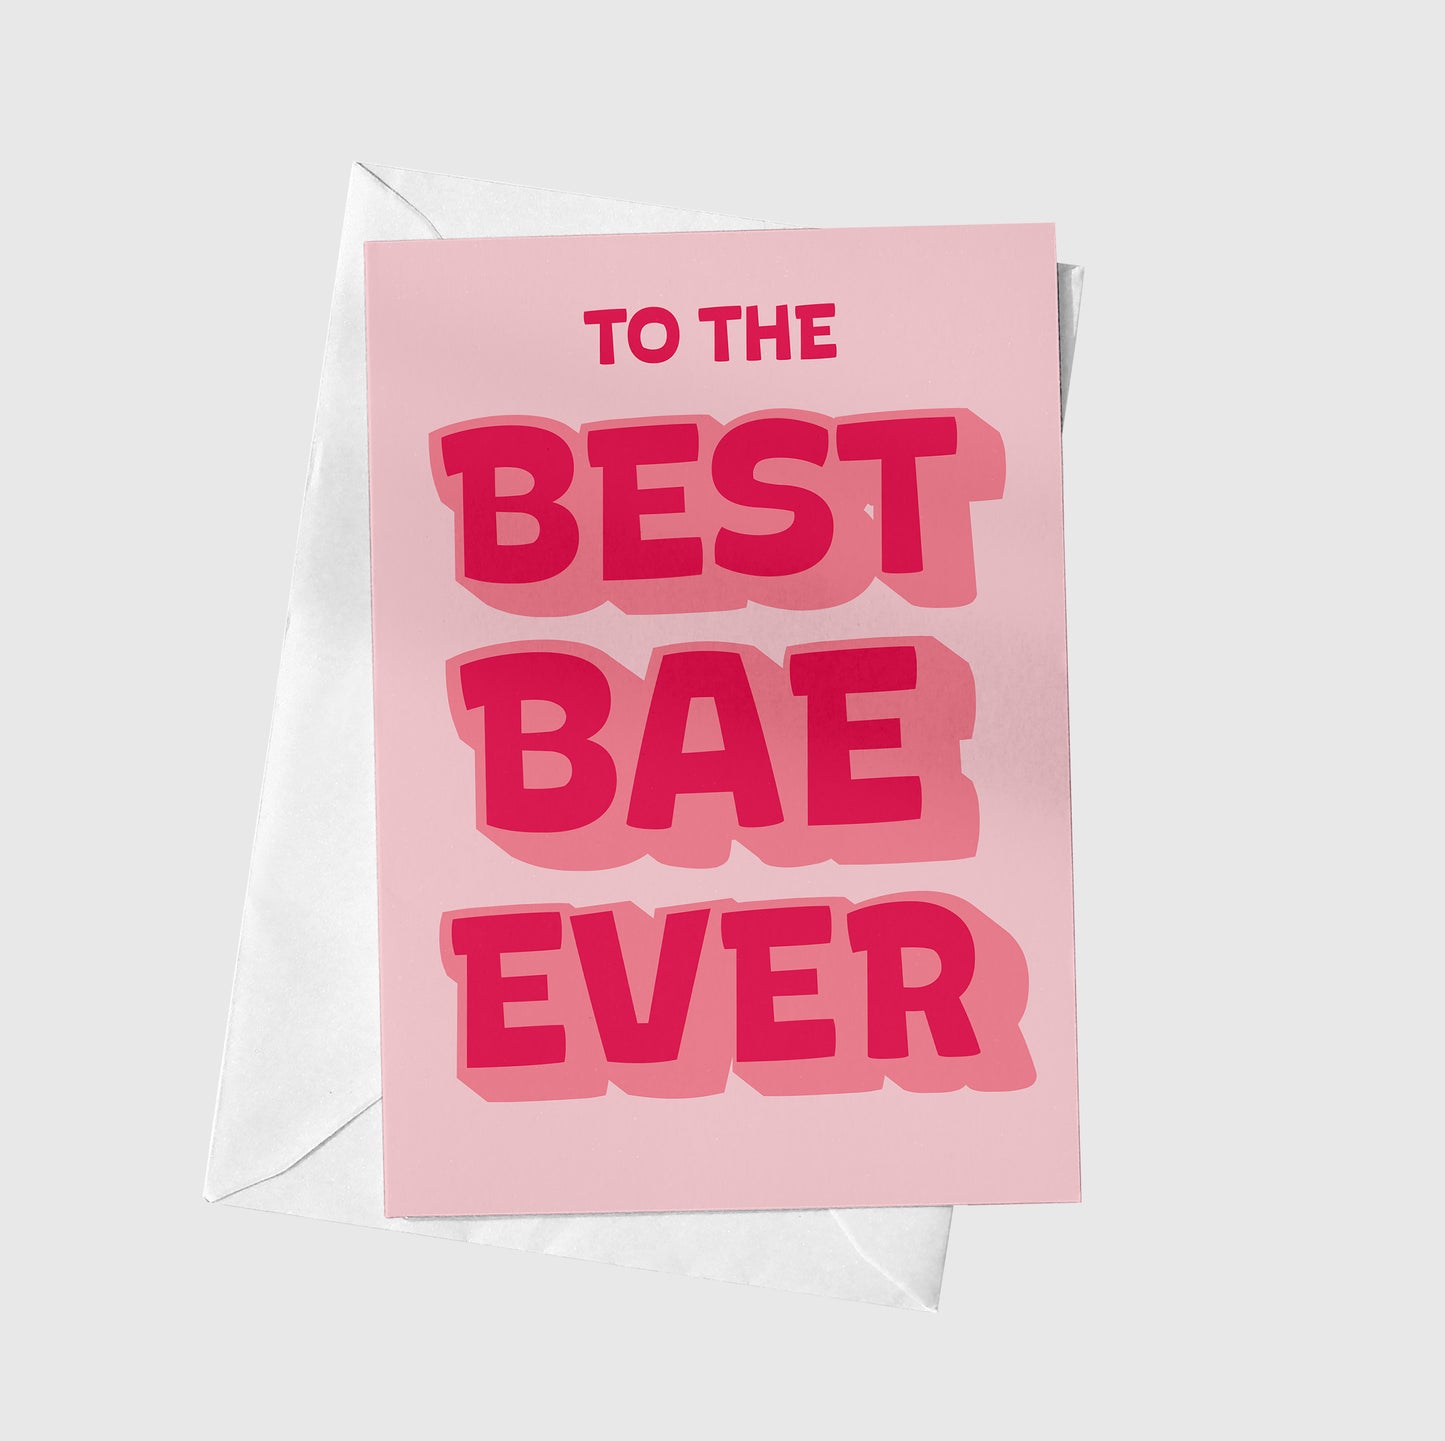 To The Best Bae Ever!